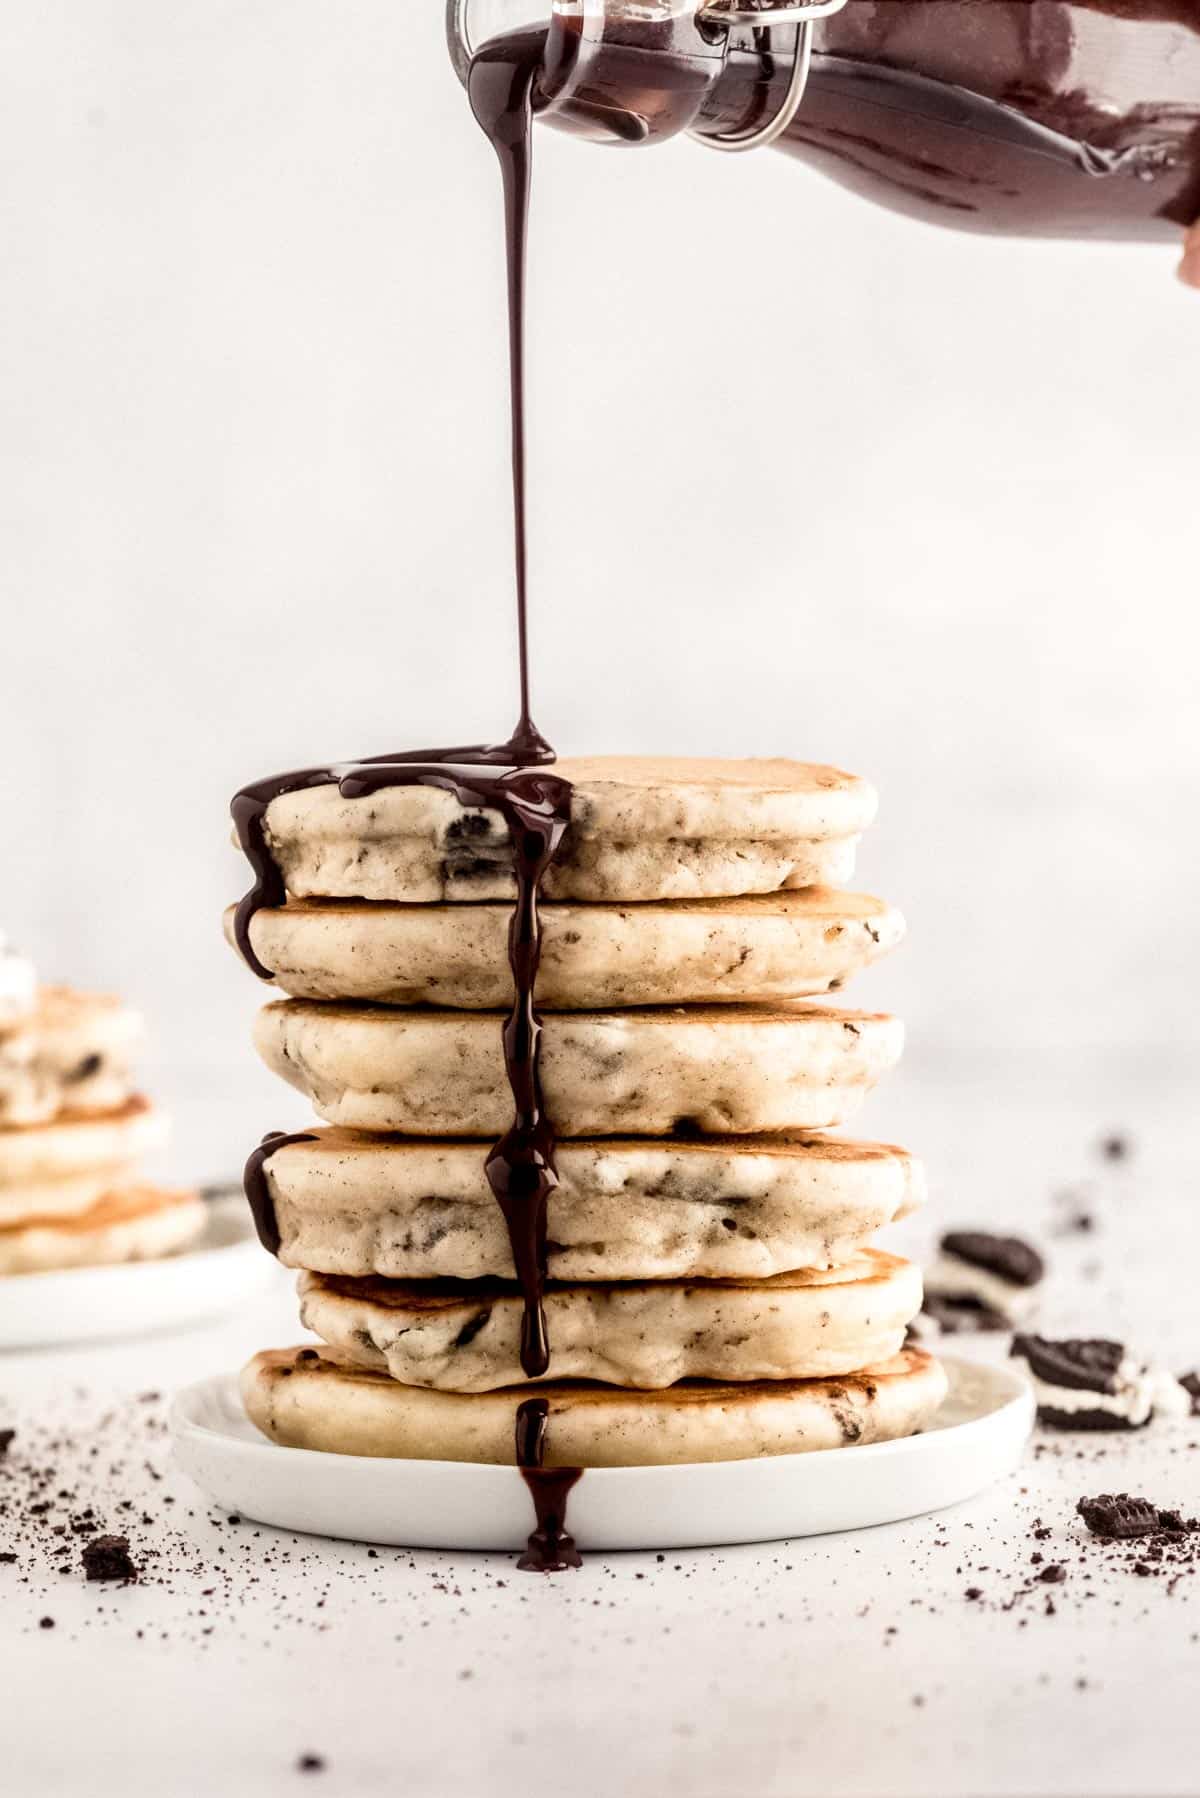 Homemade chocolate syrup being poured on a tall stack of pancakes.